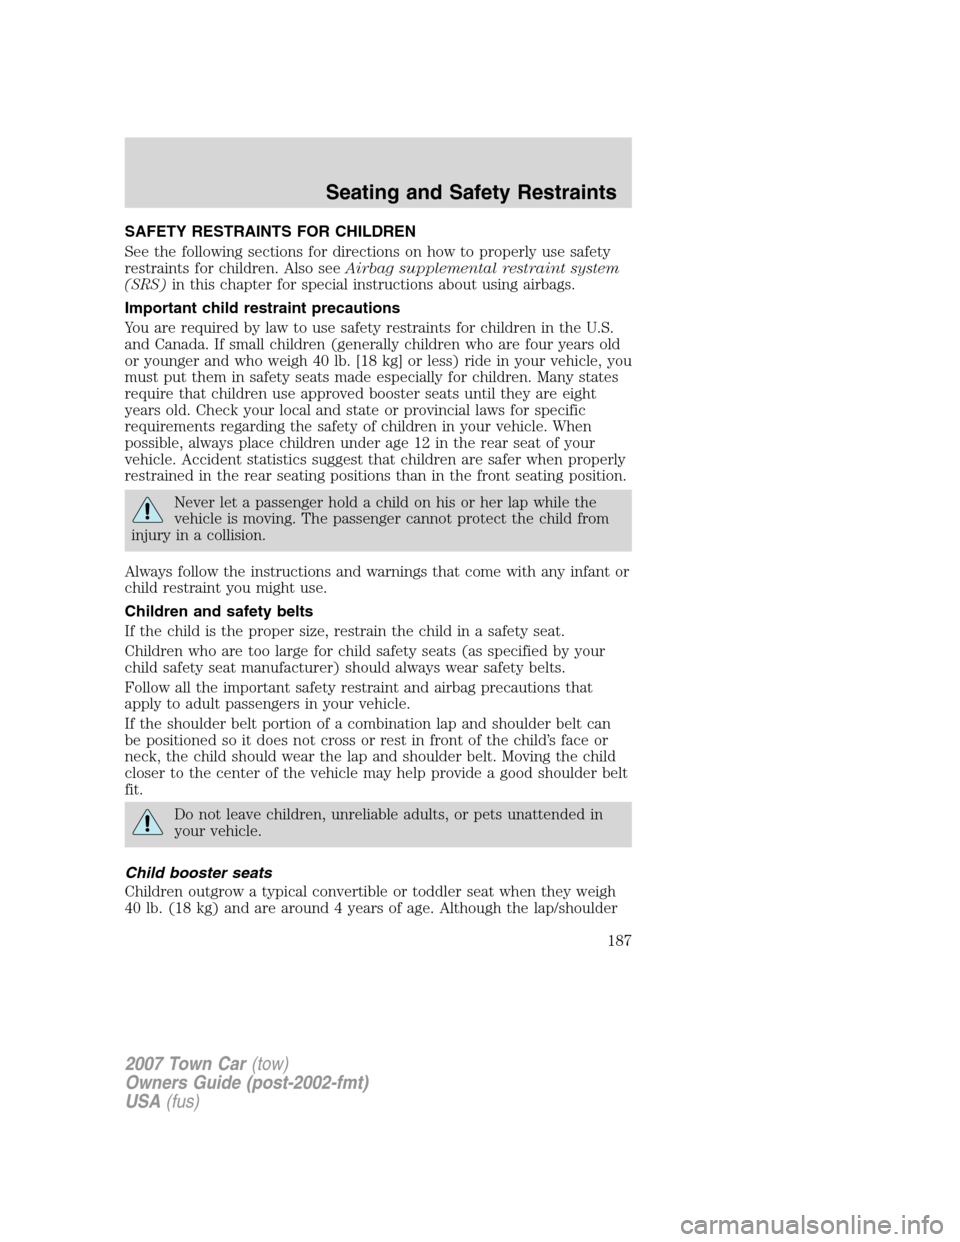 LINCOLN TOWN CAR 2007 Owners Manual SAFETY RESTRAINTS FOR CHILDREN
See the following sections for directions on how to properly use safety
restraints for children. Also seeAirbag supplemental restraint system
(SRS)in this chapter for sp